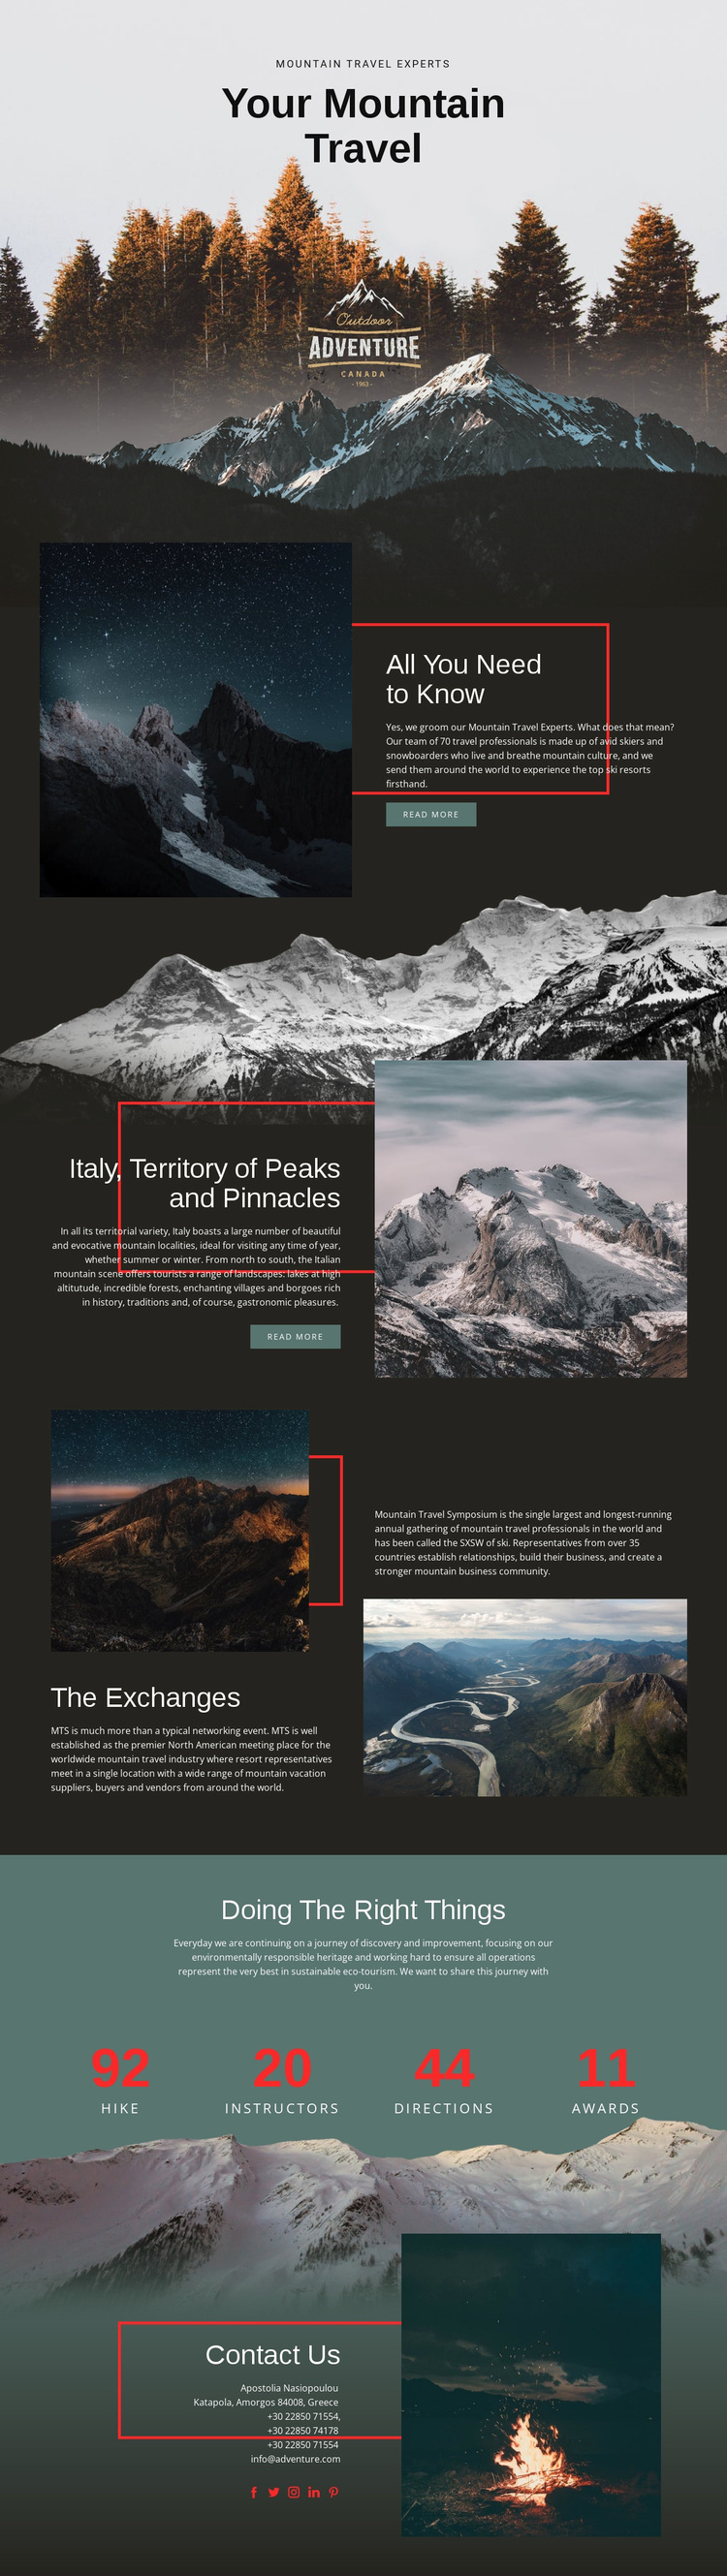 All about mountain travel Website Design